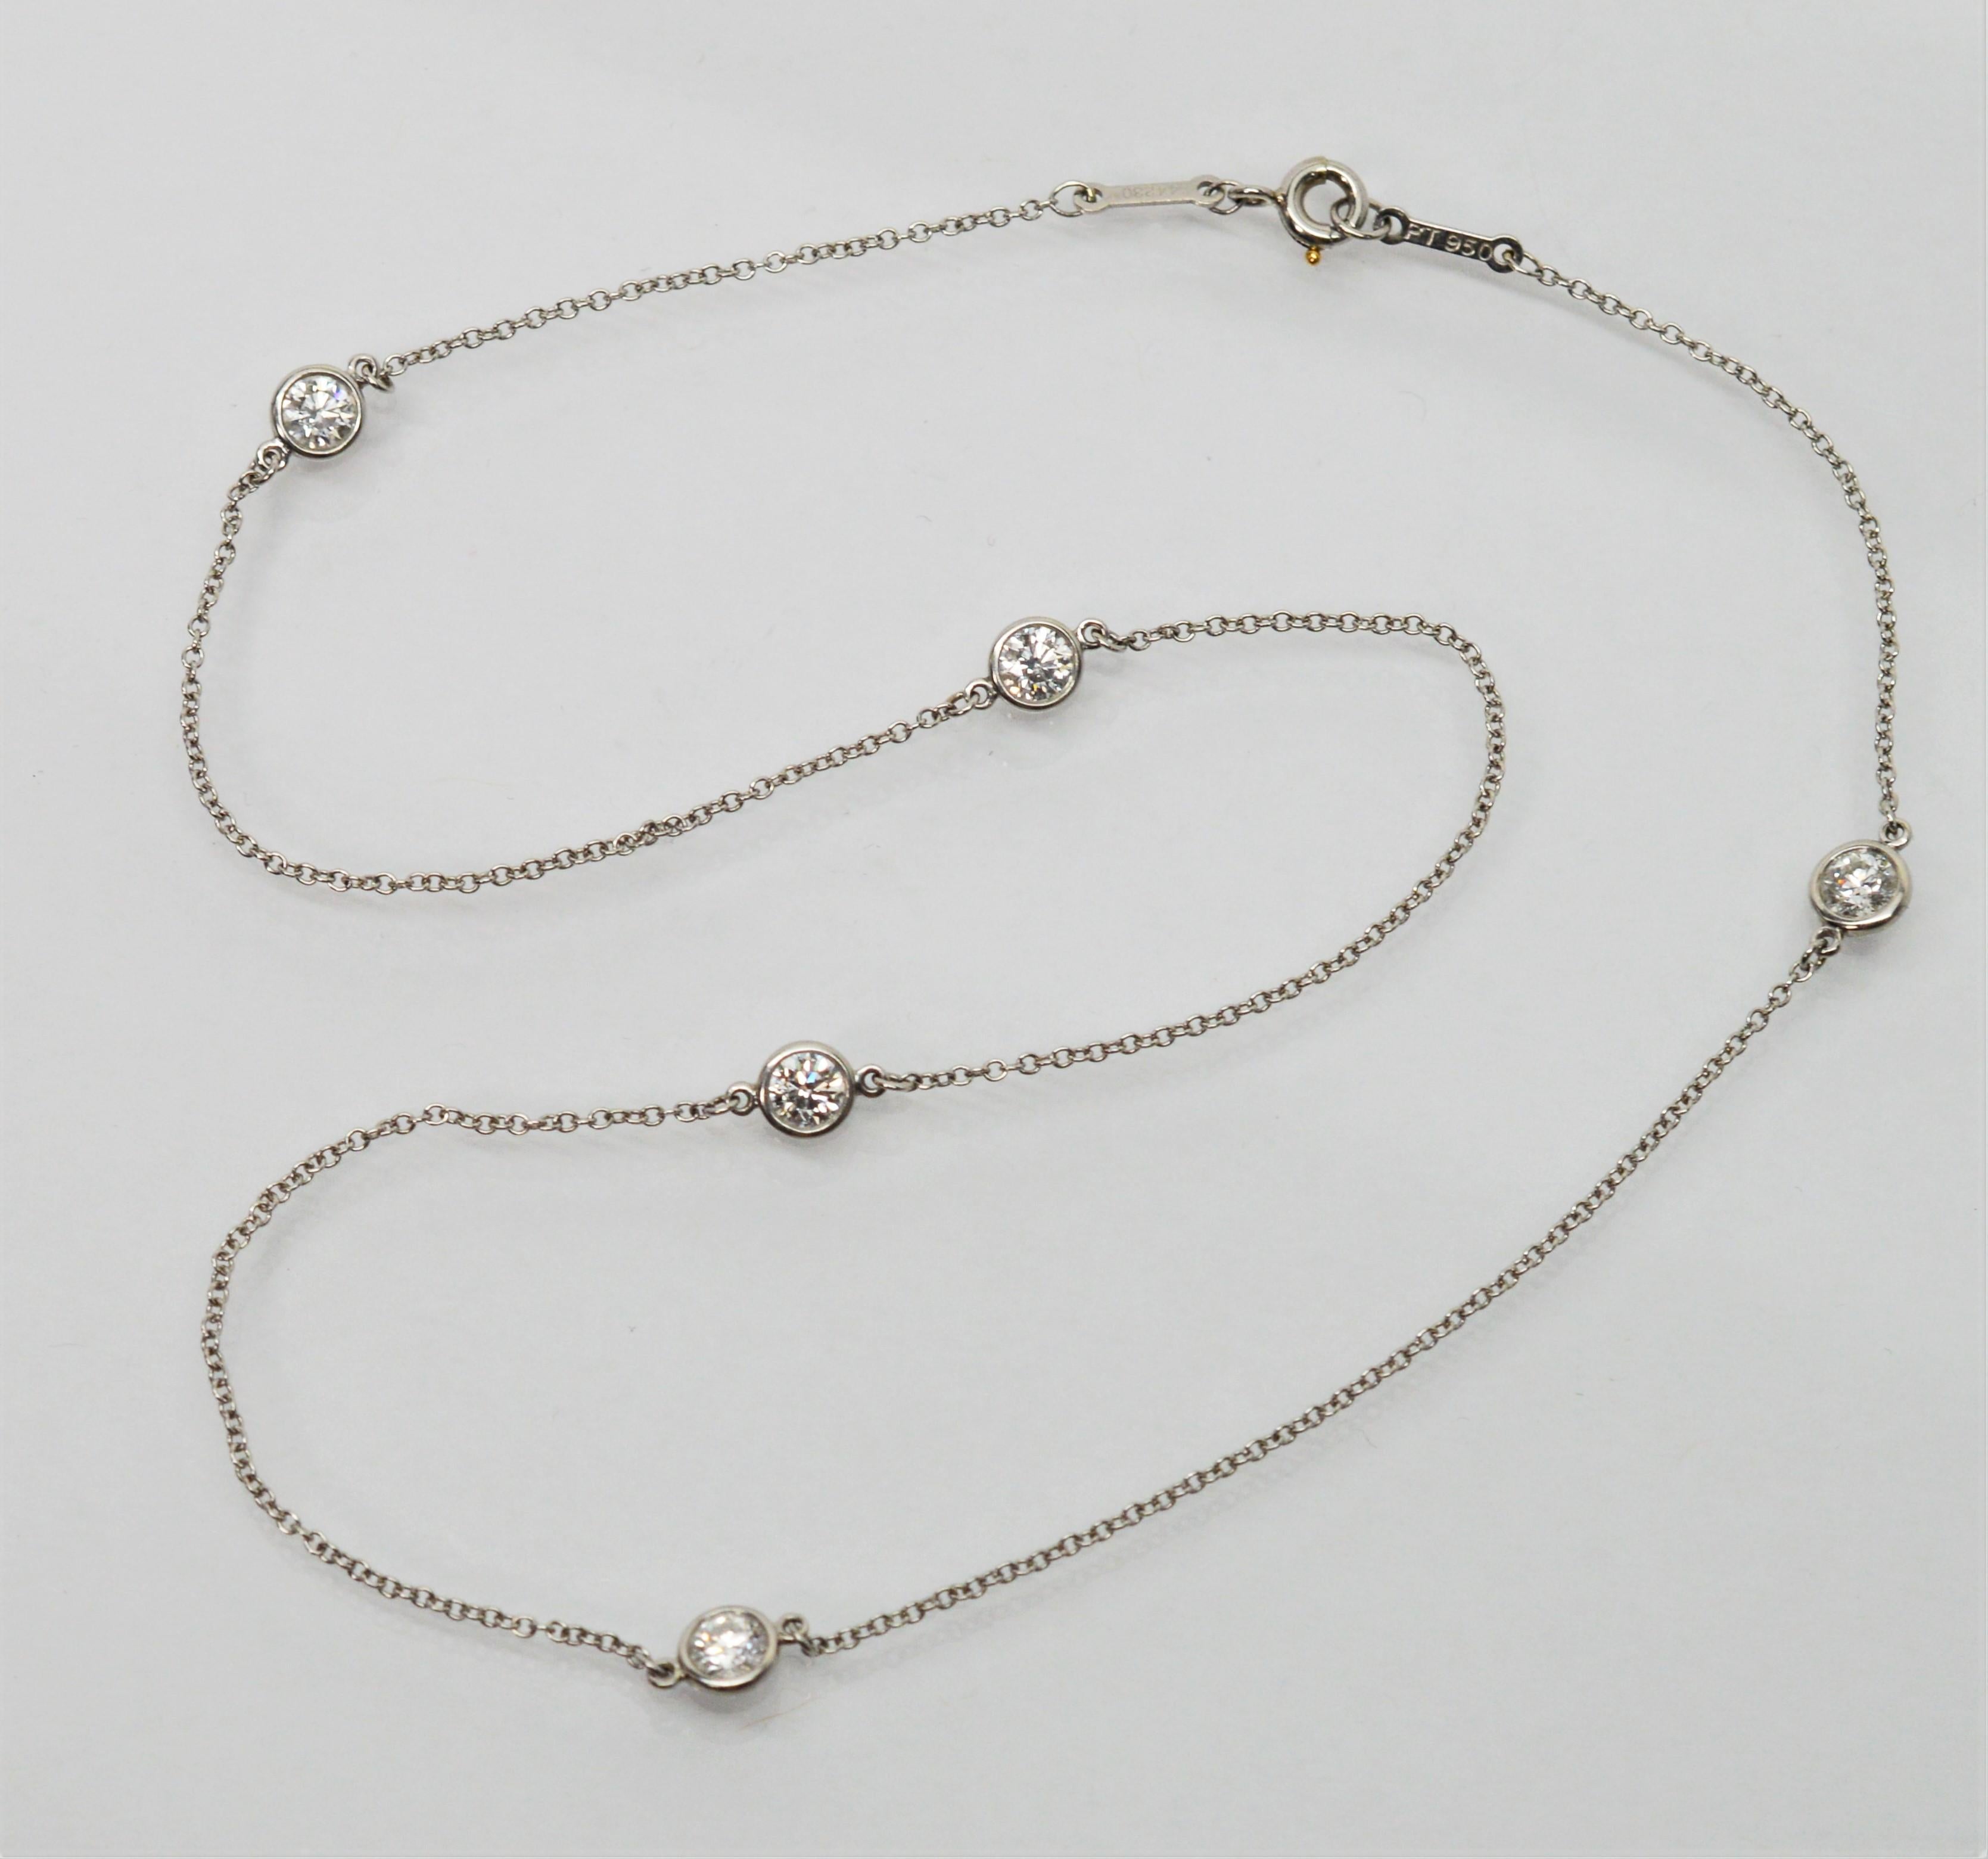 Five Stone Diamond Station Necklace by Elsa Peretti for Tiffany & Company. A simple and elegant design by Elsa Peretti, with floating diamond stations on a fifteen inch platinum chain necklace that create a fresh light look. The diamond stations are